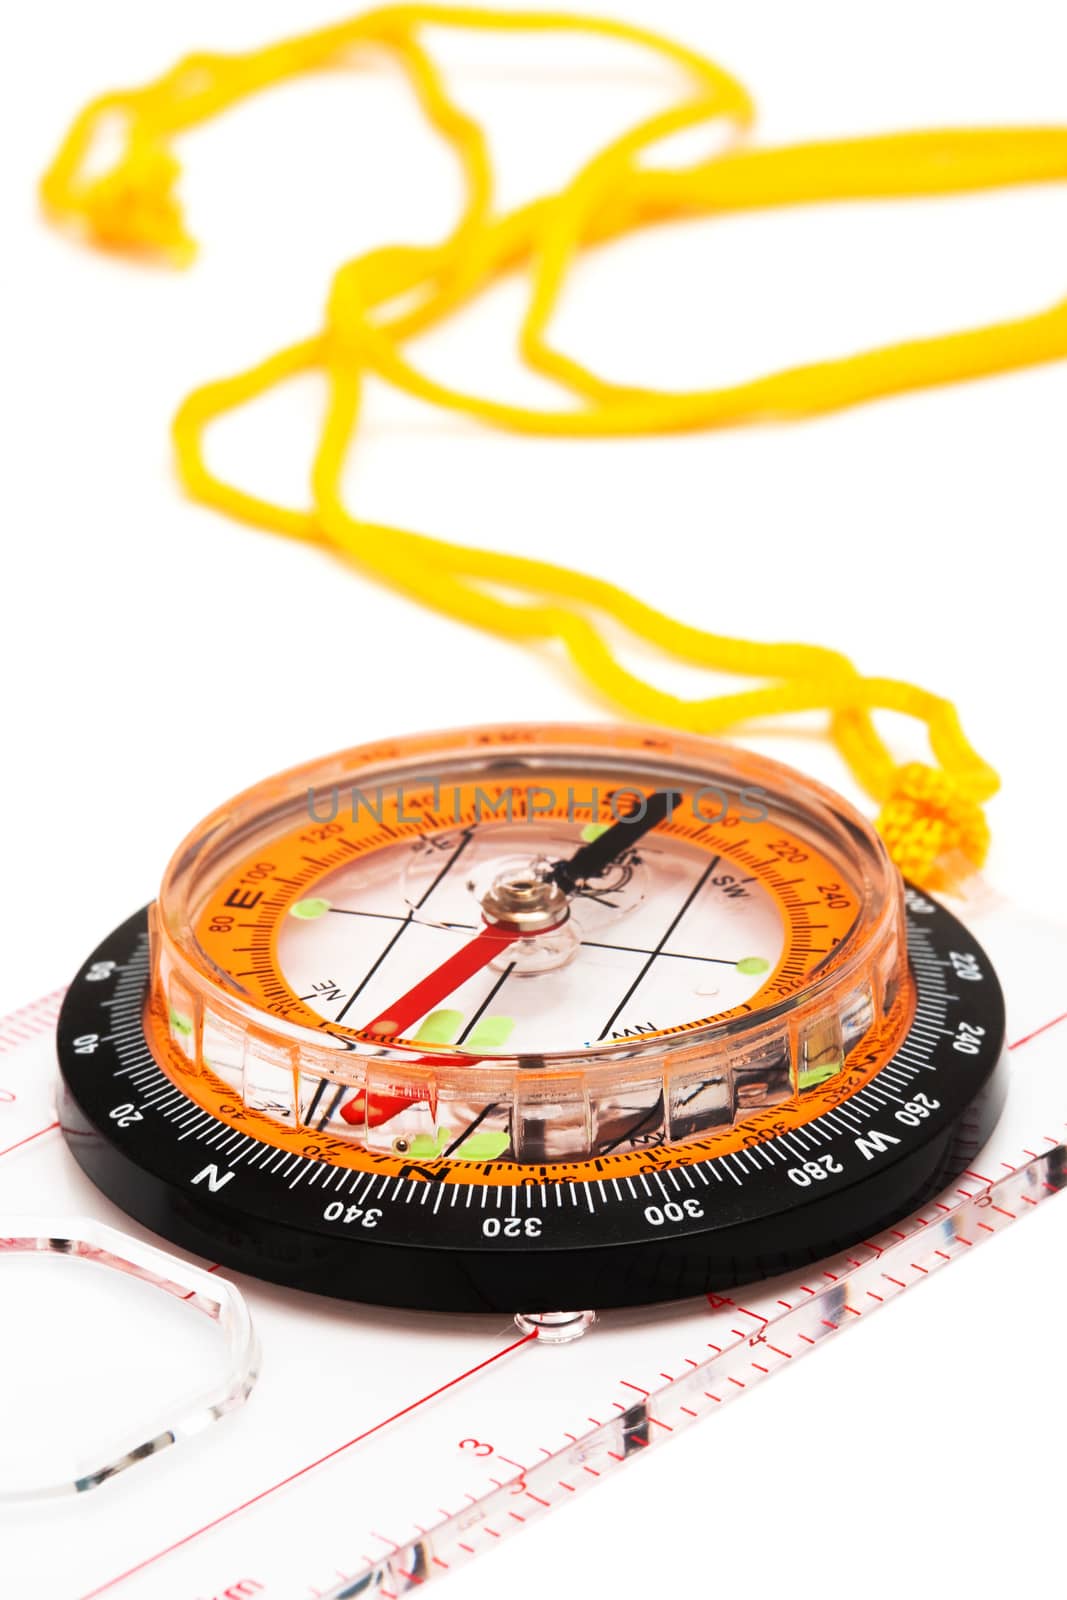 Compass with a yellow cord on a white background